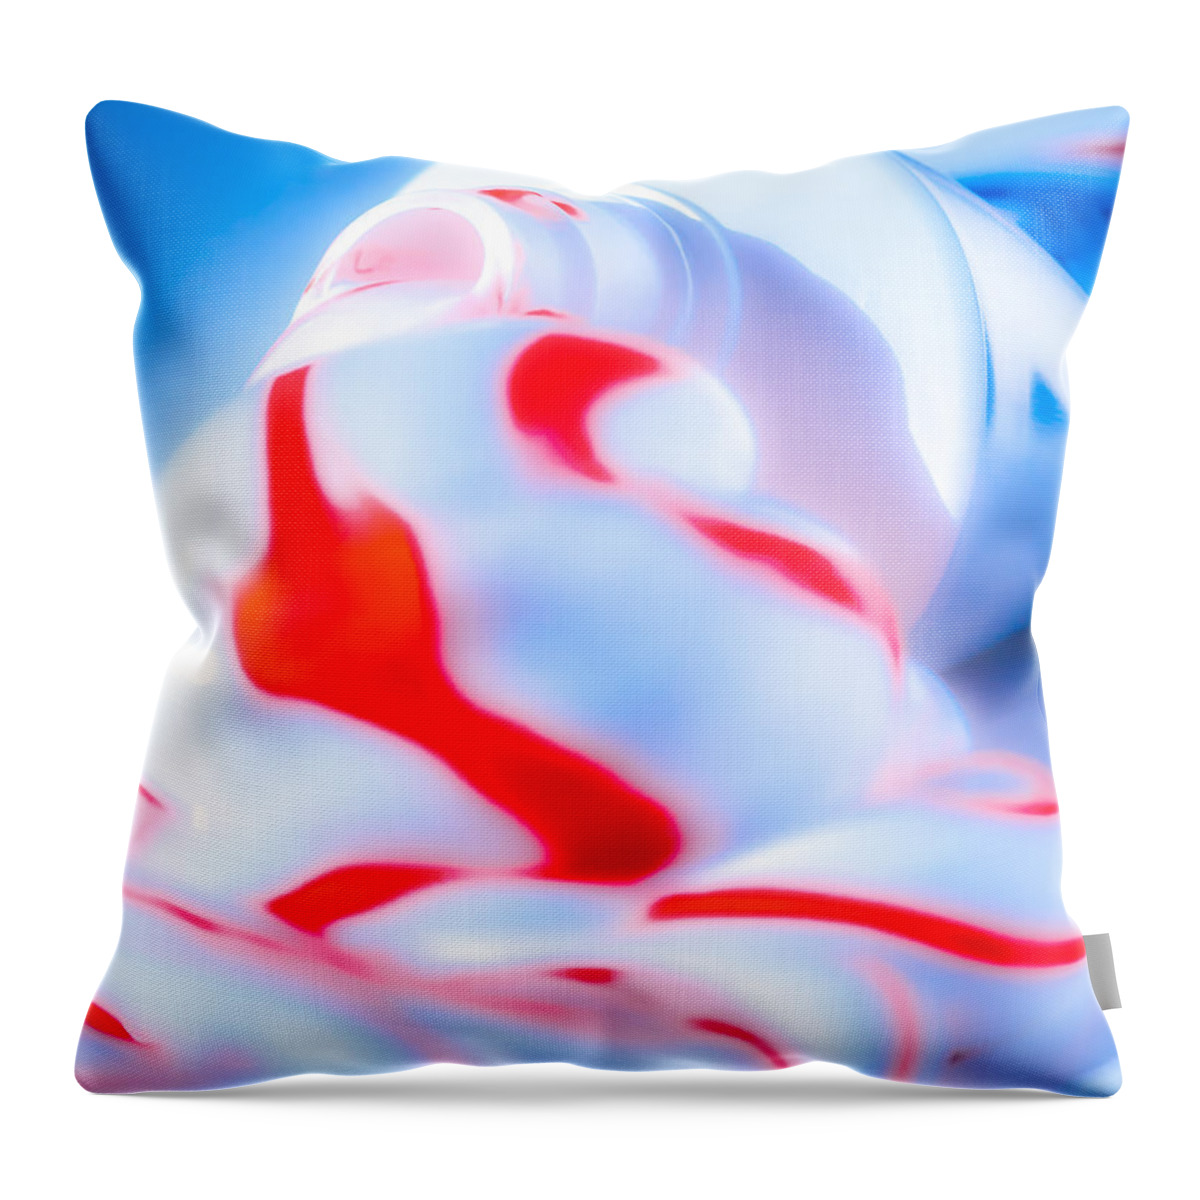 Toothpaste Throw Pillow featuring the photograph Toothpaste by Bob Orsillo